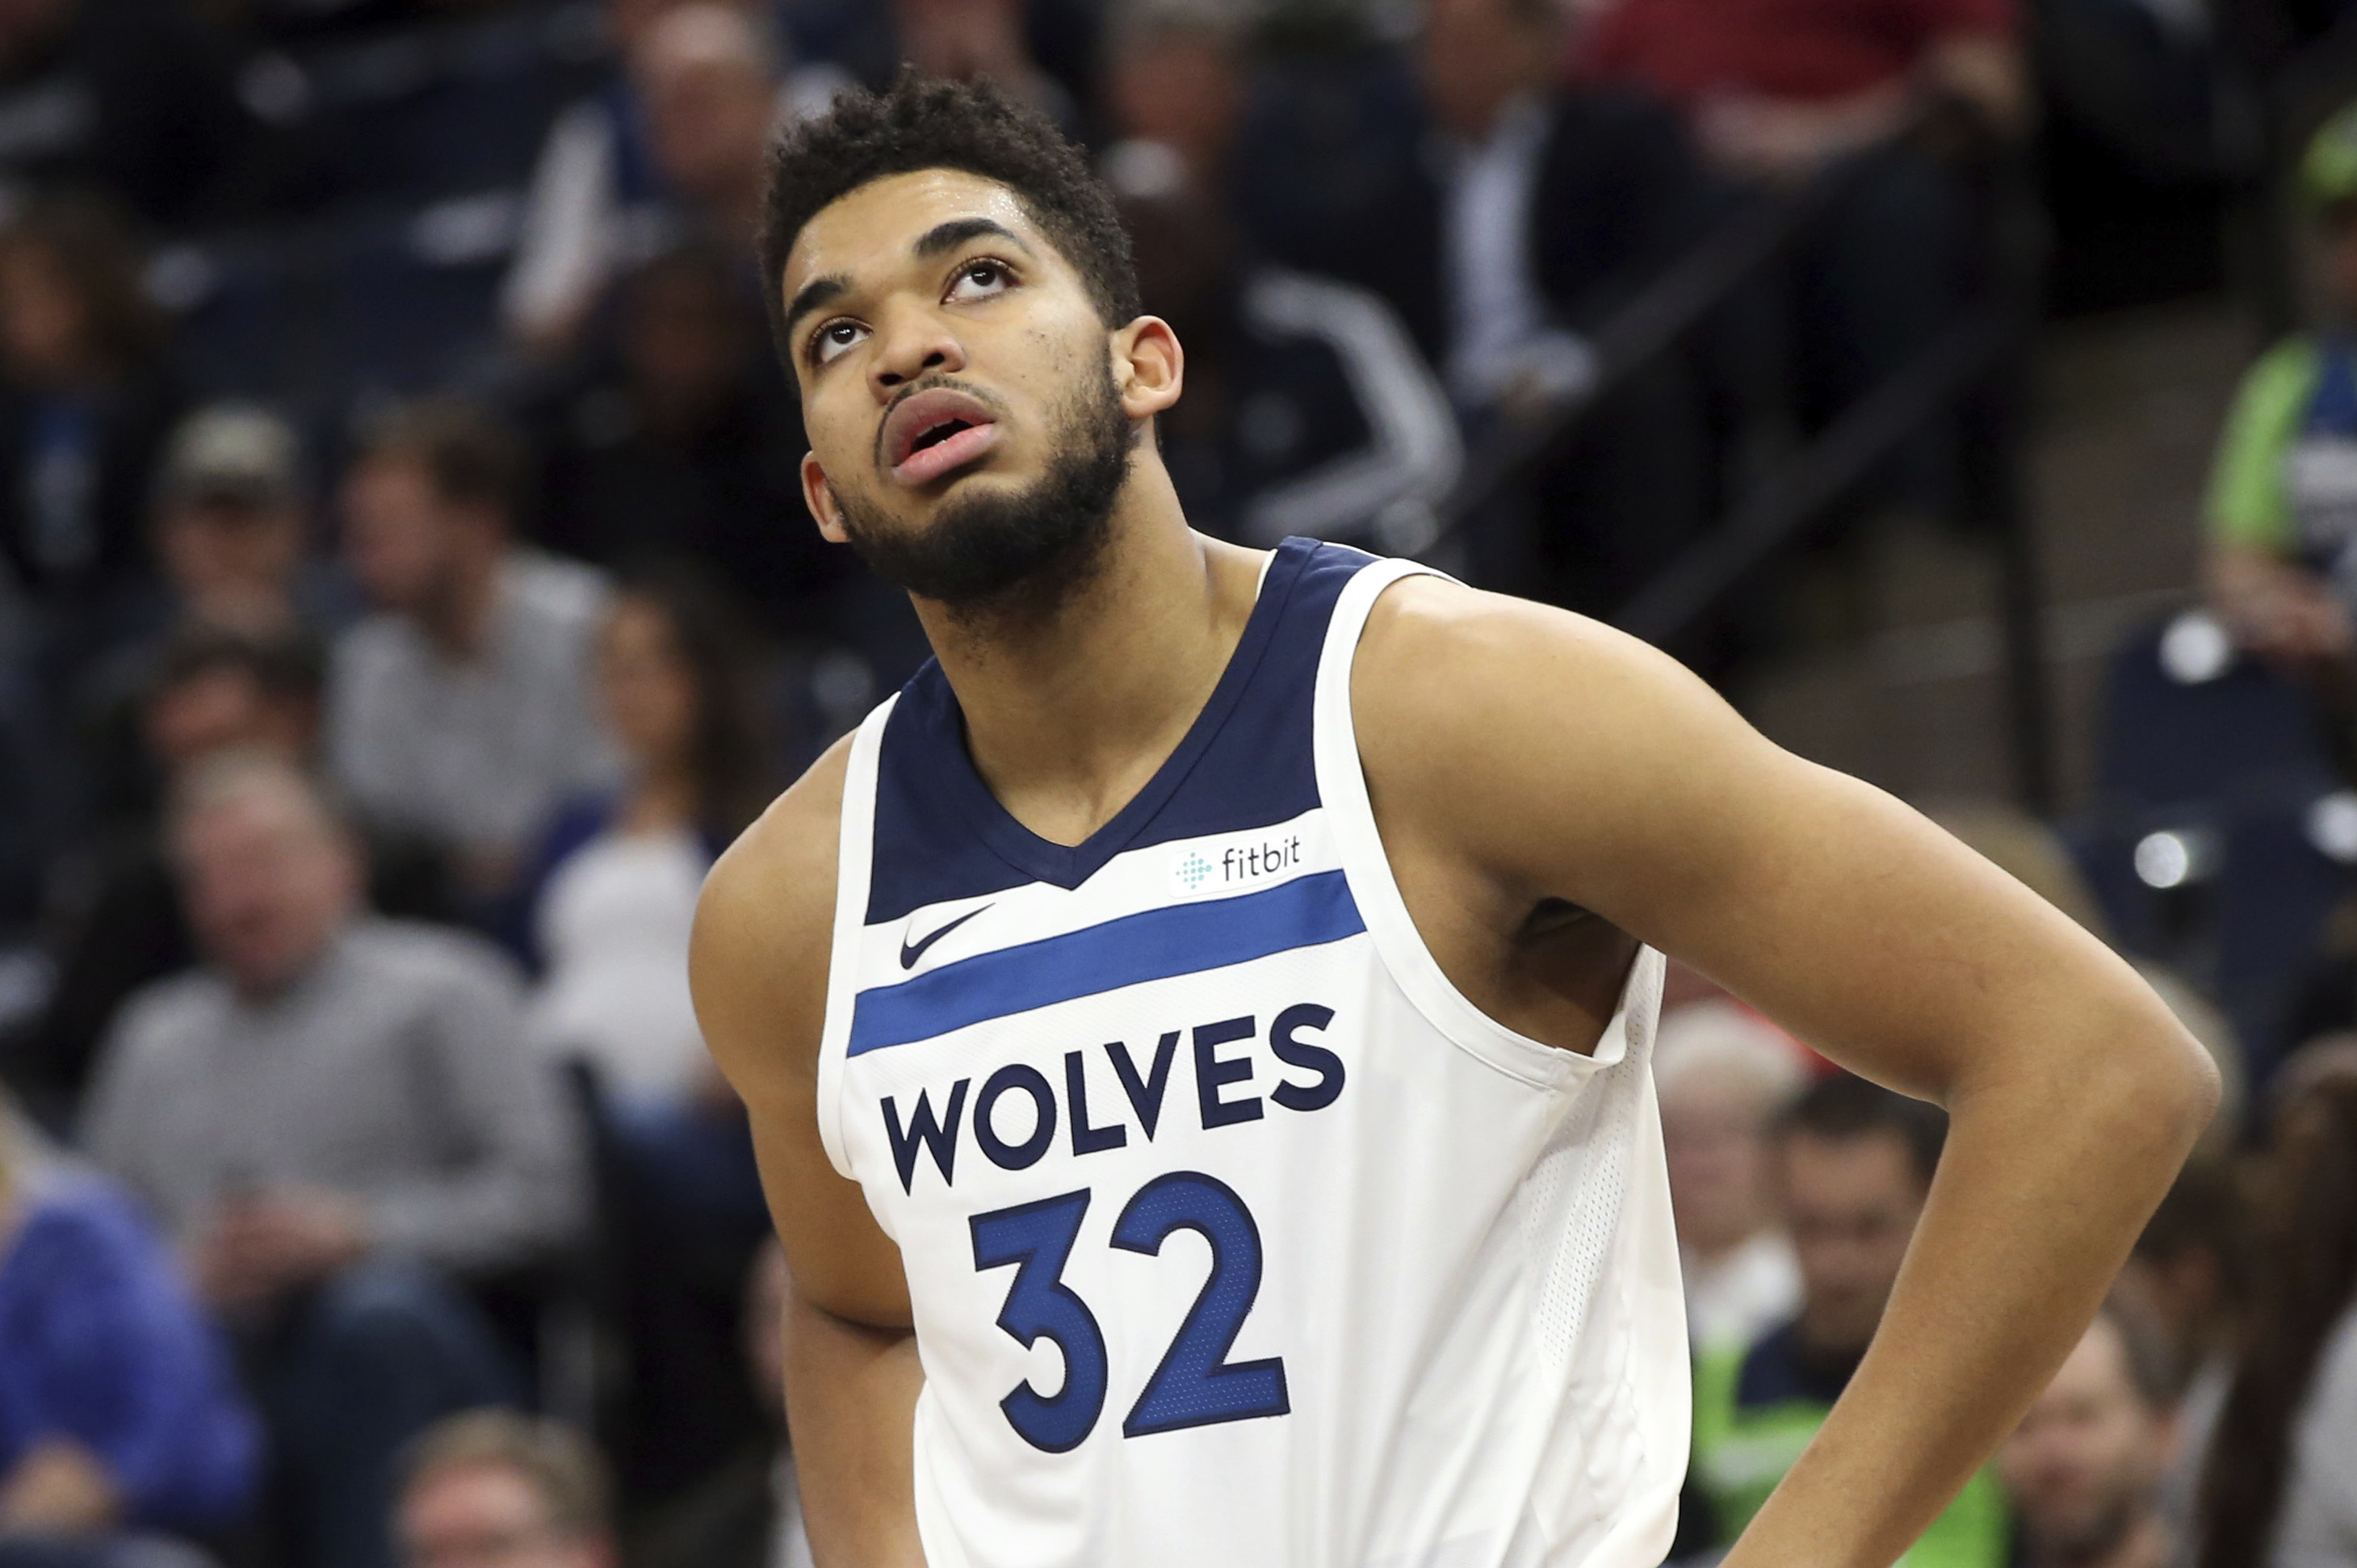 NBA — Report: Karl-Anthony Towns Could Be Traded This Summer